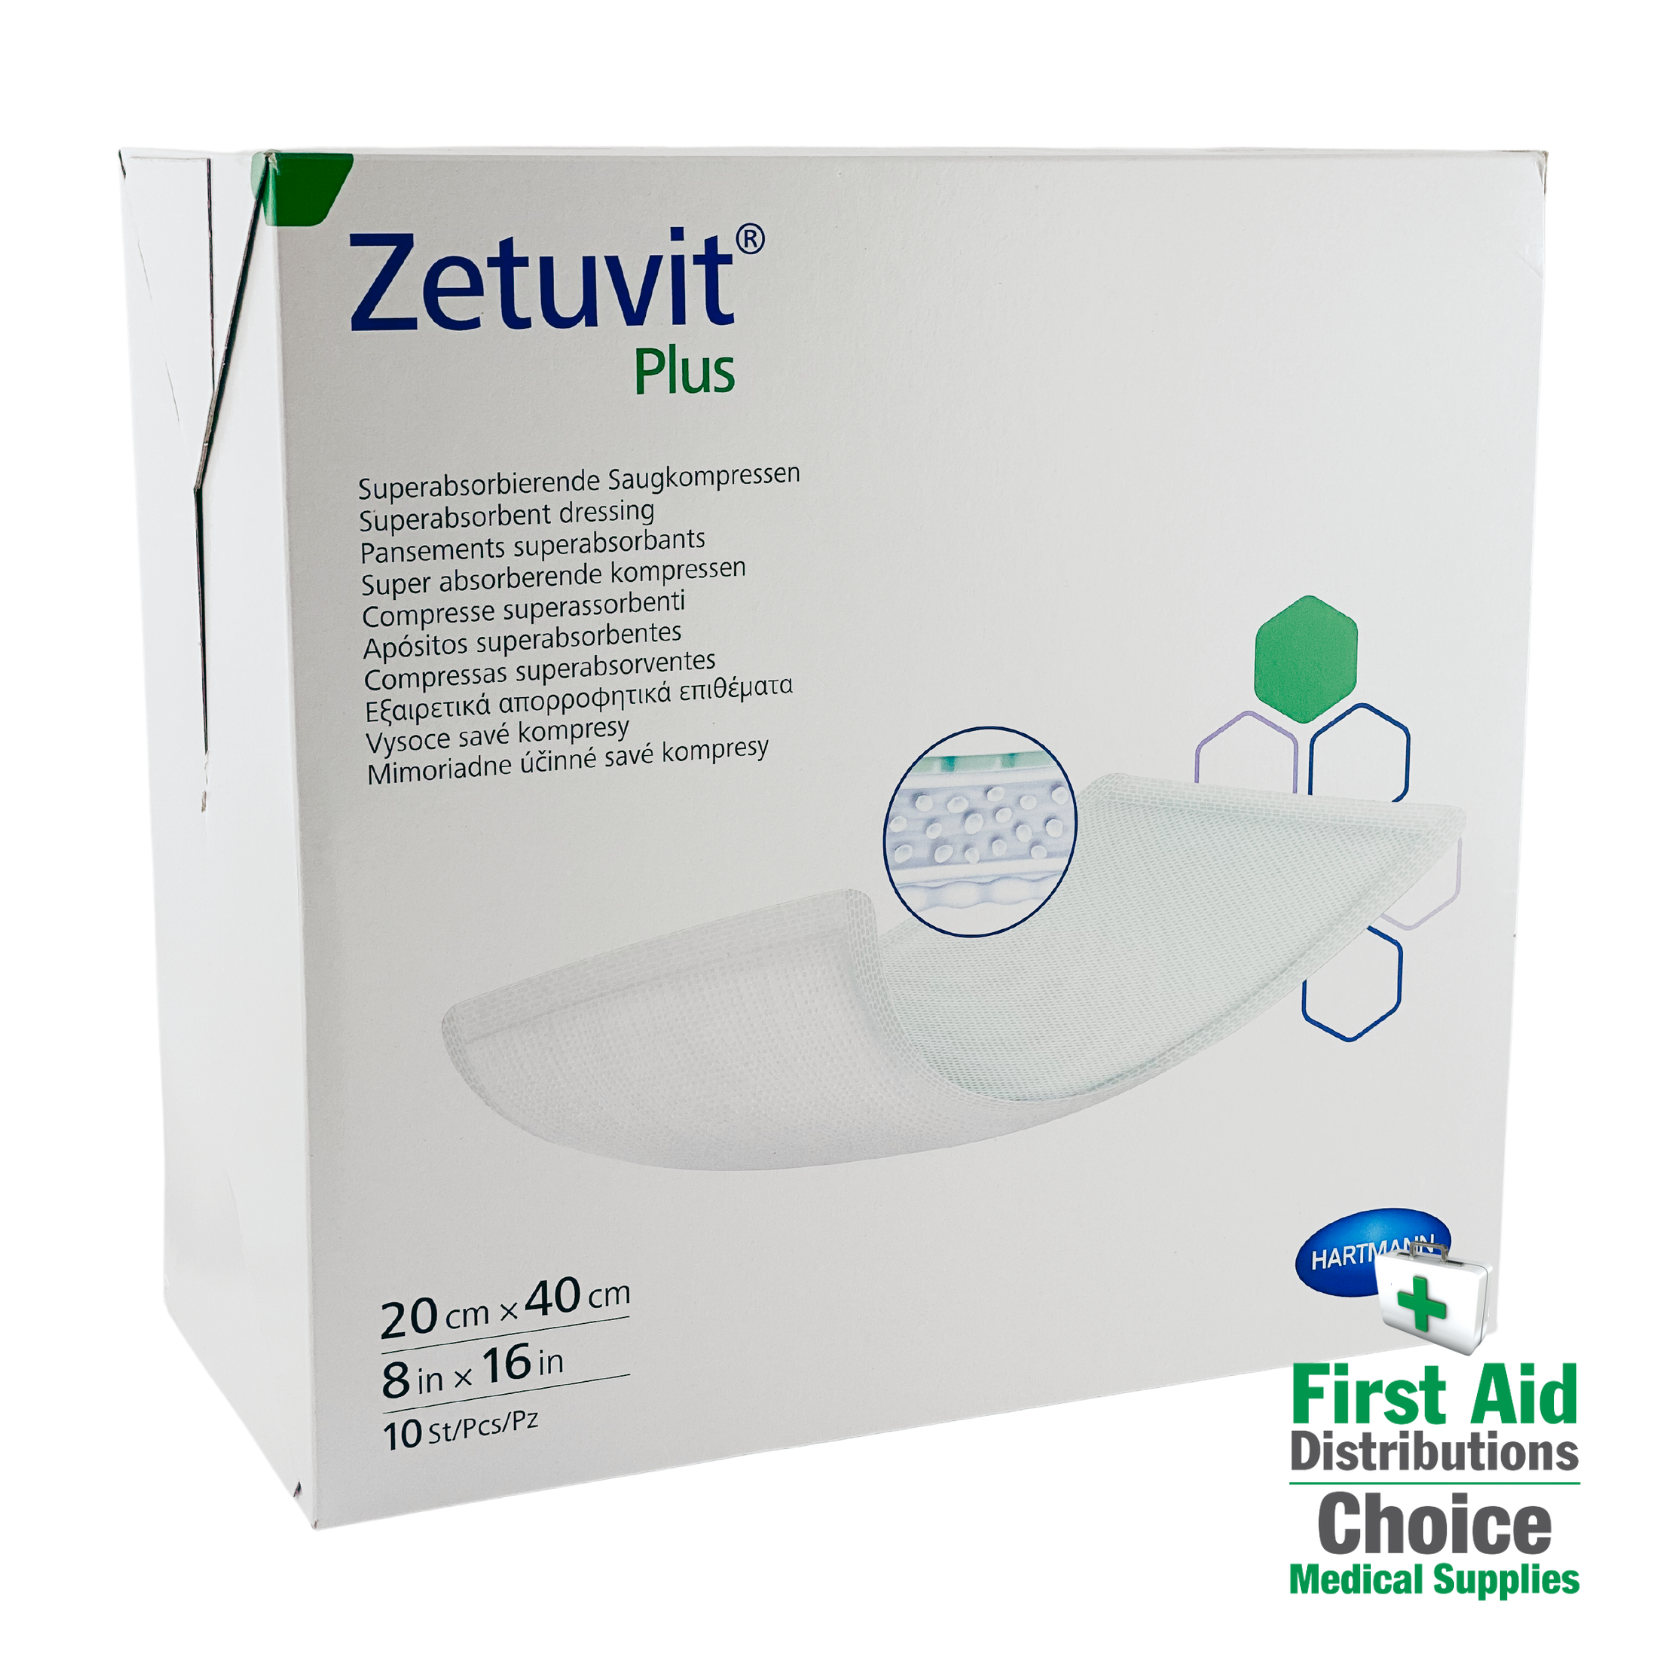 collections/Zetuvit_Plus_Dressing_20cm_x_40cm_Box_First_Aid_Distributions.png